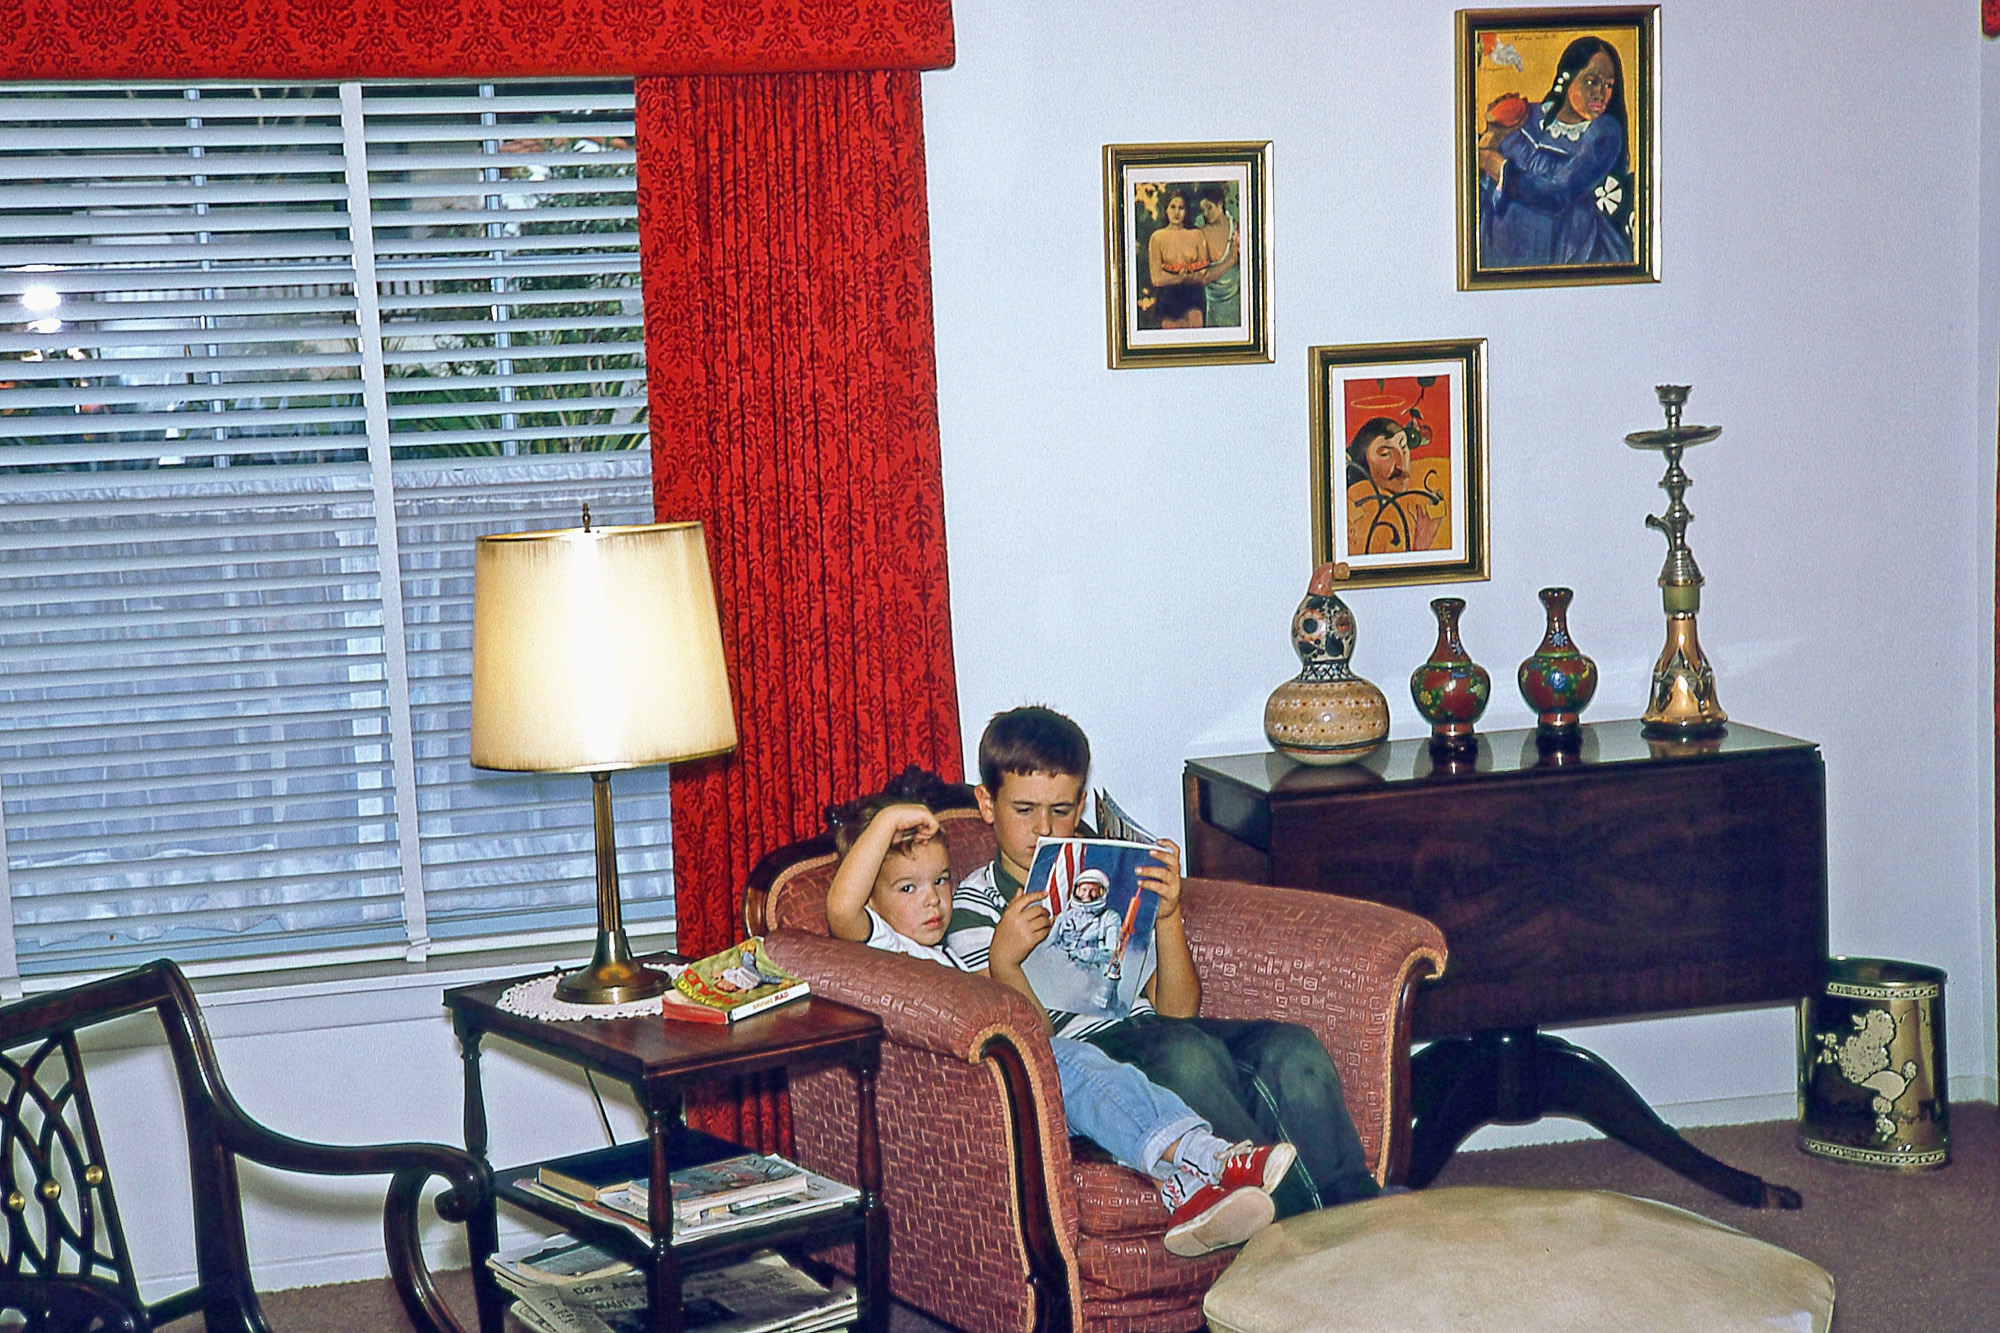 This was taken by my dad almost certainly on the last weekend in January, 1967. Not only am I reading a book about astronauts with my little bro, but the newspaper on the side table is the L.A. Times. By zooming in, the headline appears to be: "3 Astronauts Killed in Apollo Test. " I was such a follower of the space program, and this photo just renews the sense of tragedy I felt. View full size.